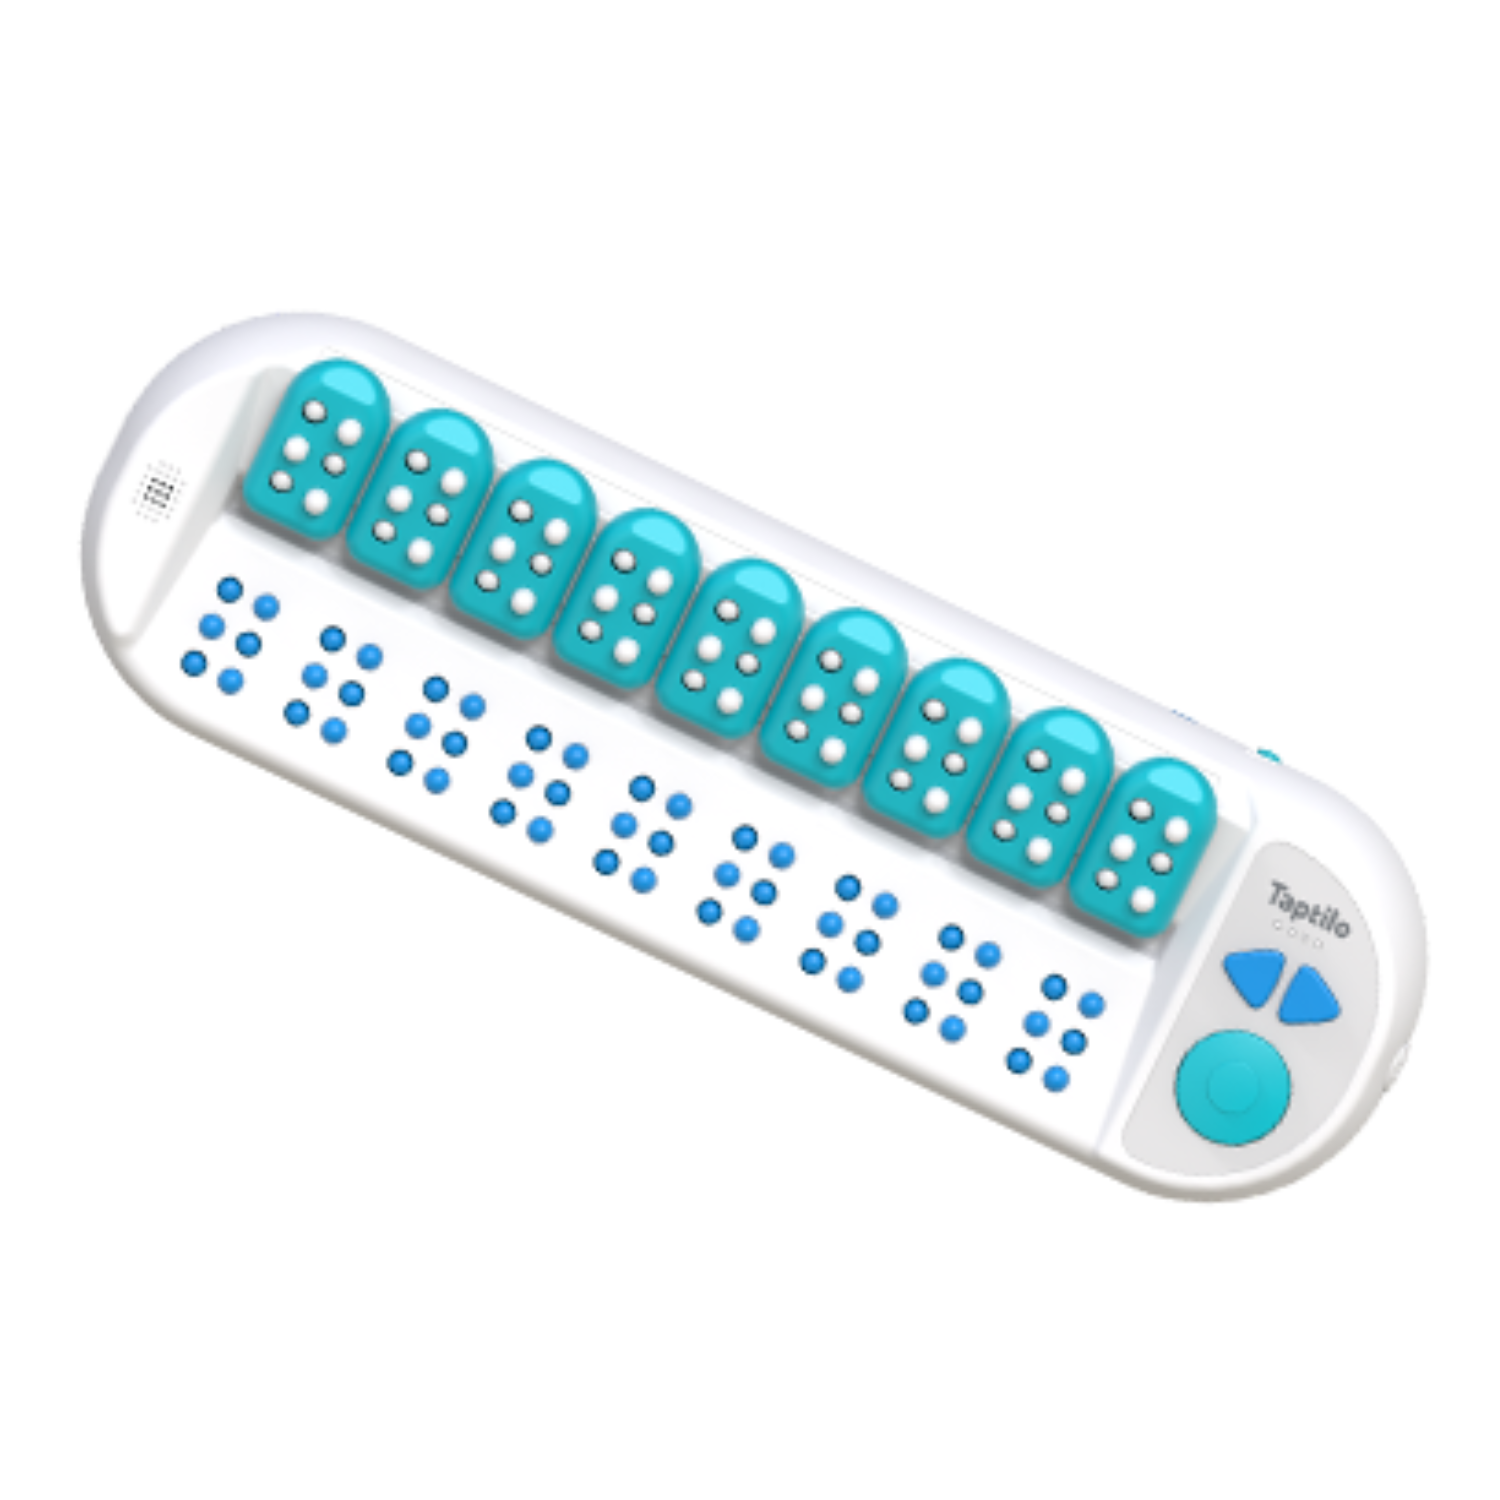 Image of the Taptilo braille learning device from HIMS Inc